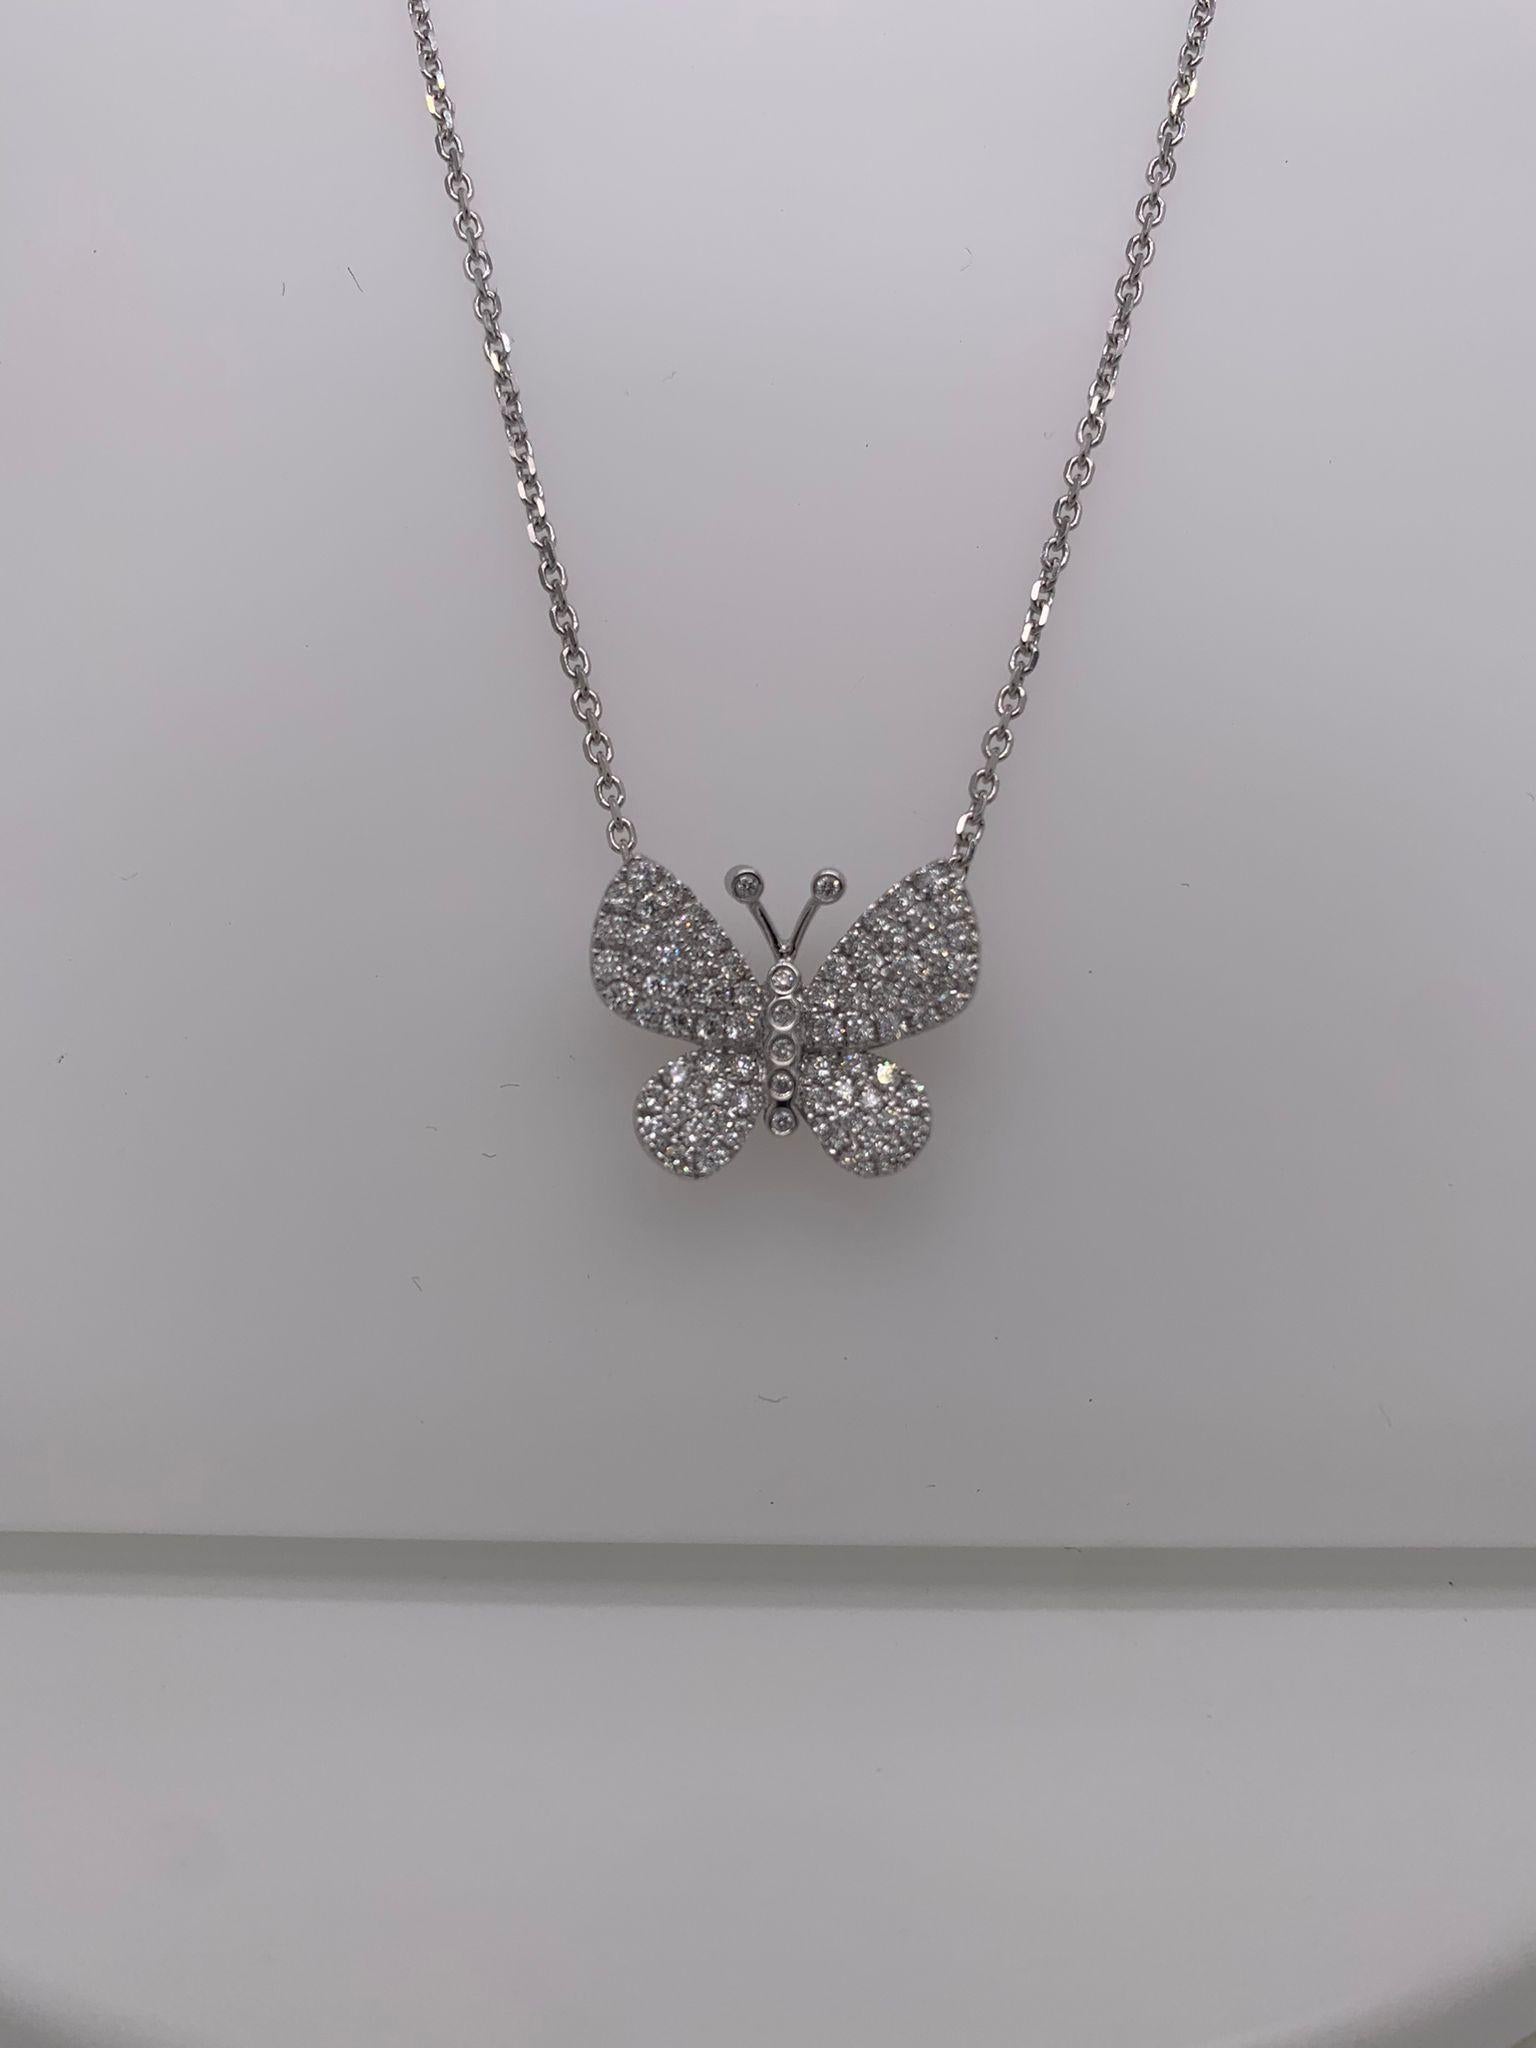 81 pieces of diamonds weighing .67 carats.
18K white gold
Weighing 5.2 grams
Butterfly dimensions (17Wx15H) mm